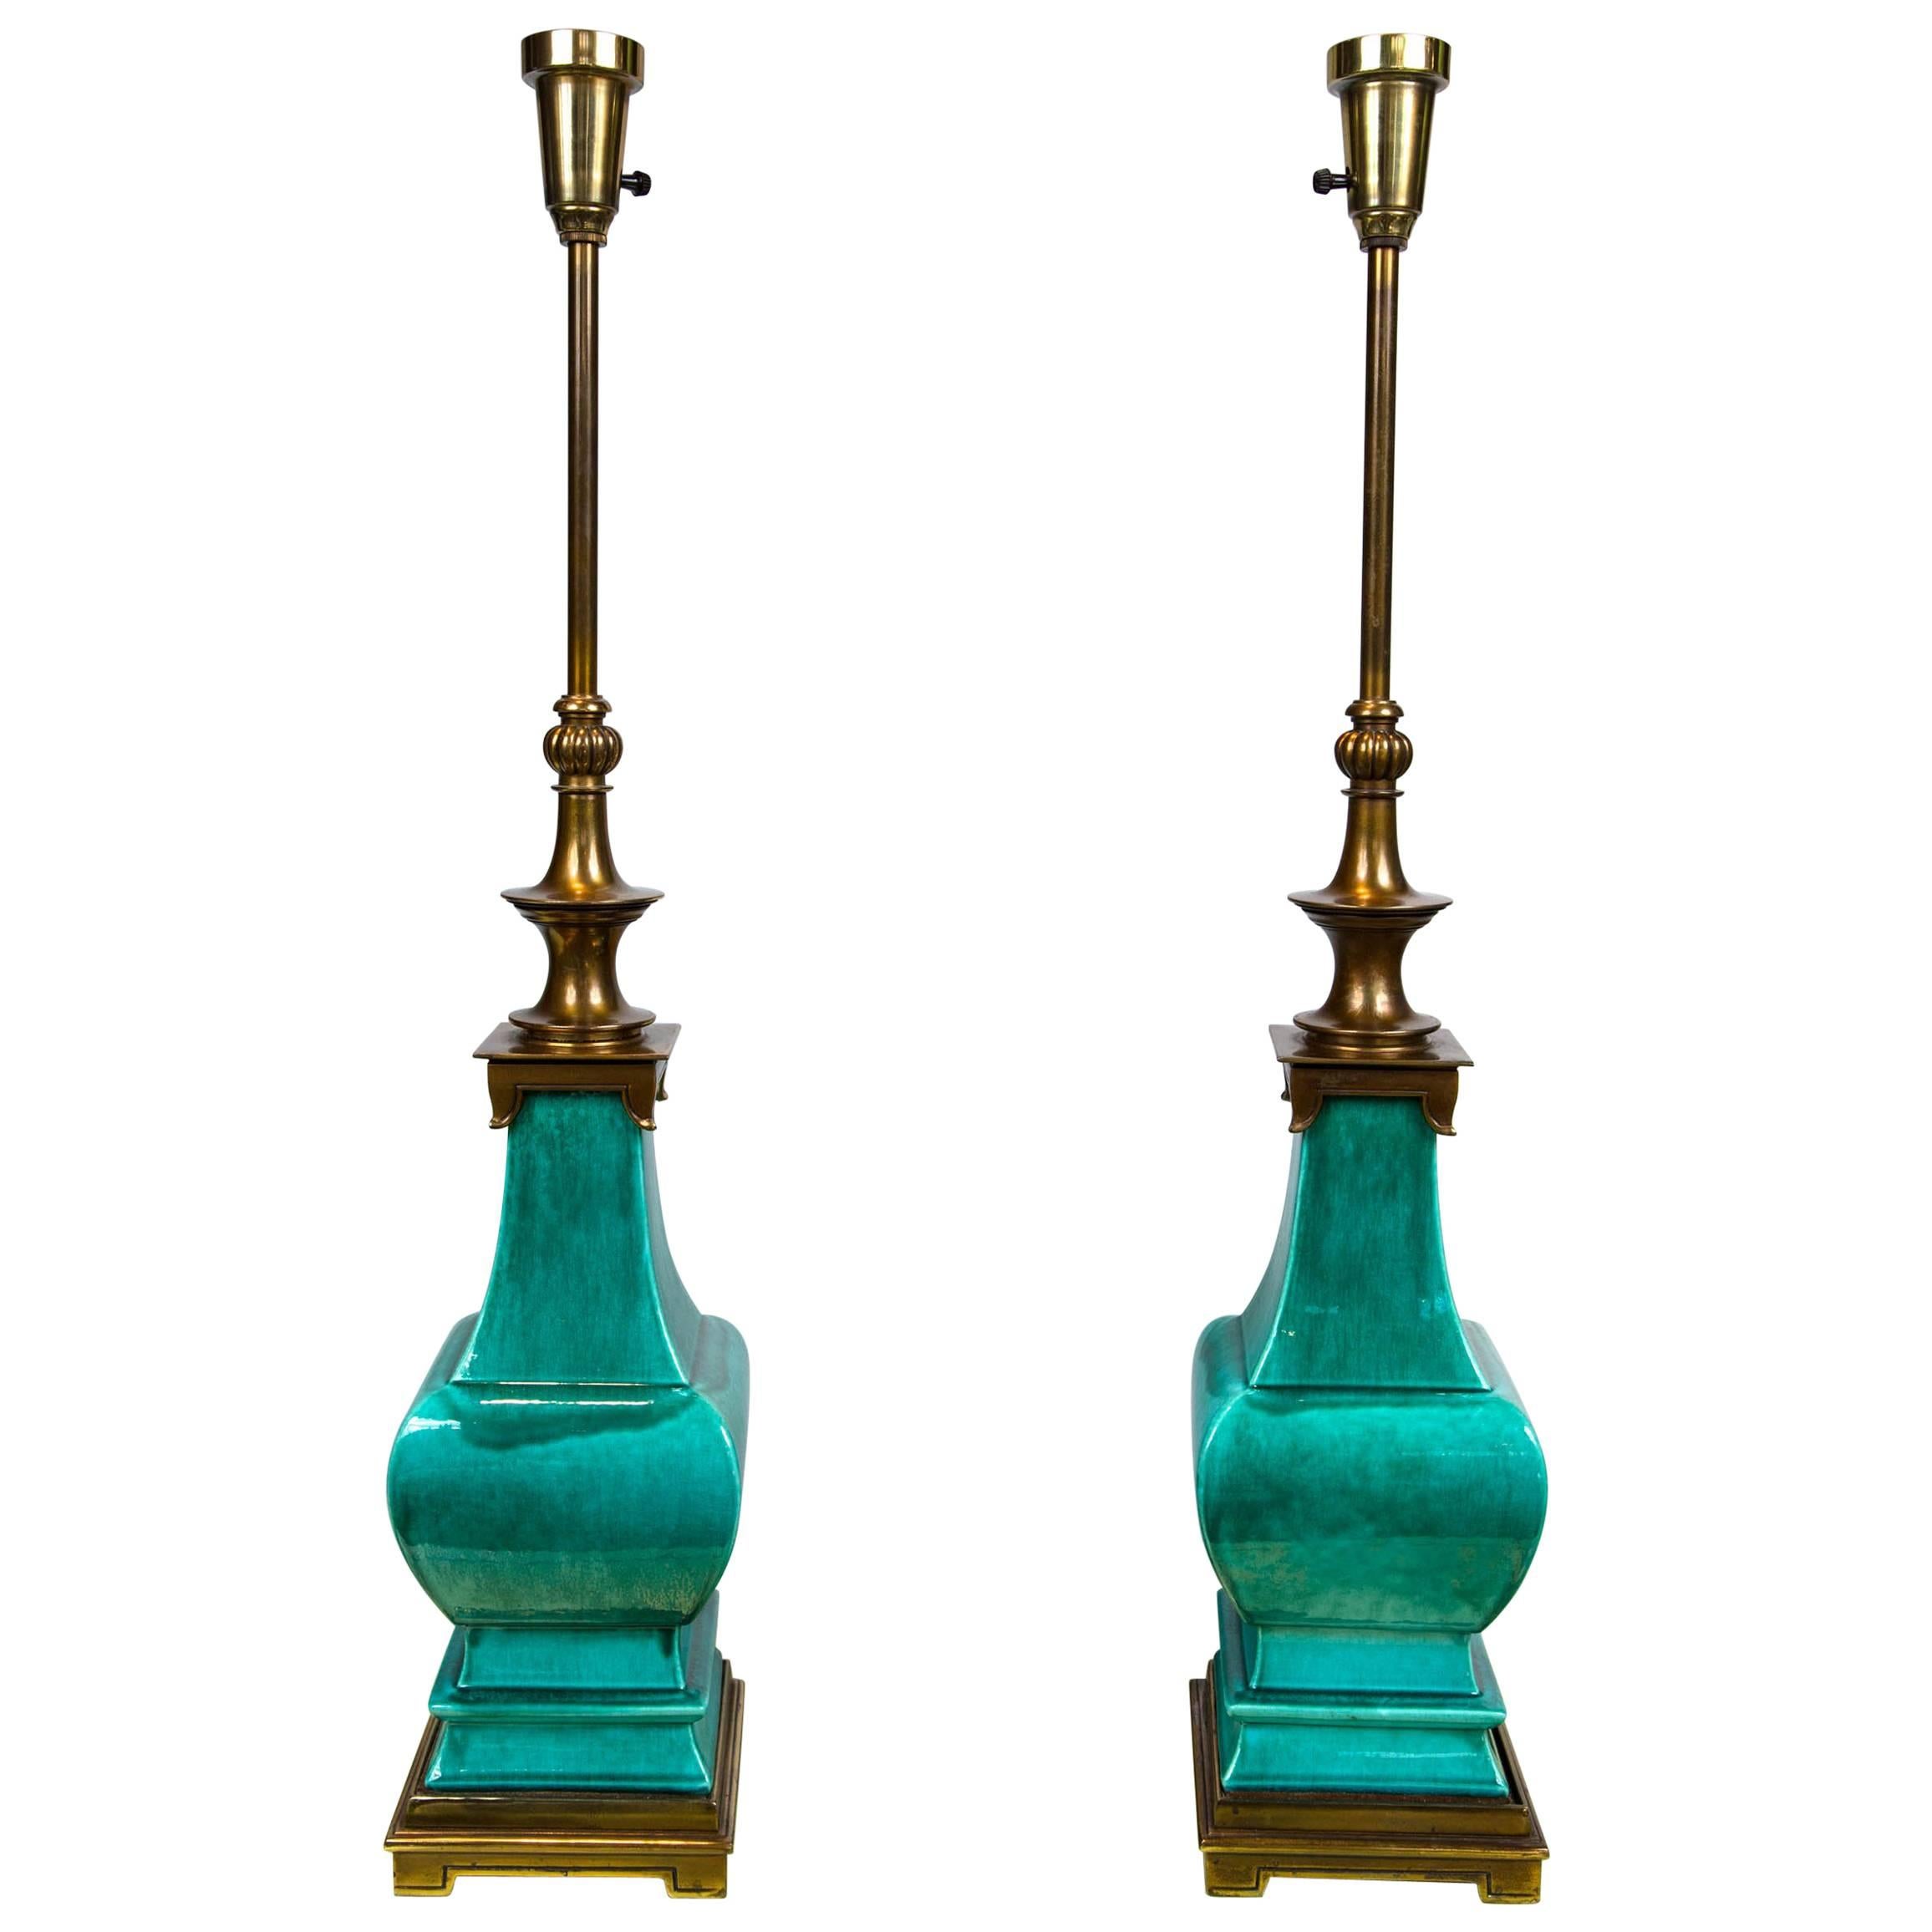 Pair of Midcentury Green Glazed Pagoda Style Stiffel Lamps For Sale